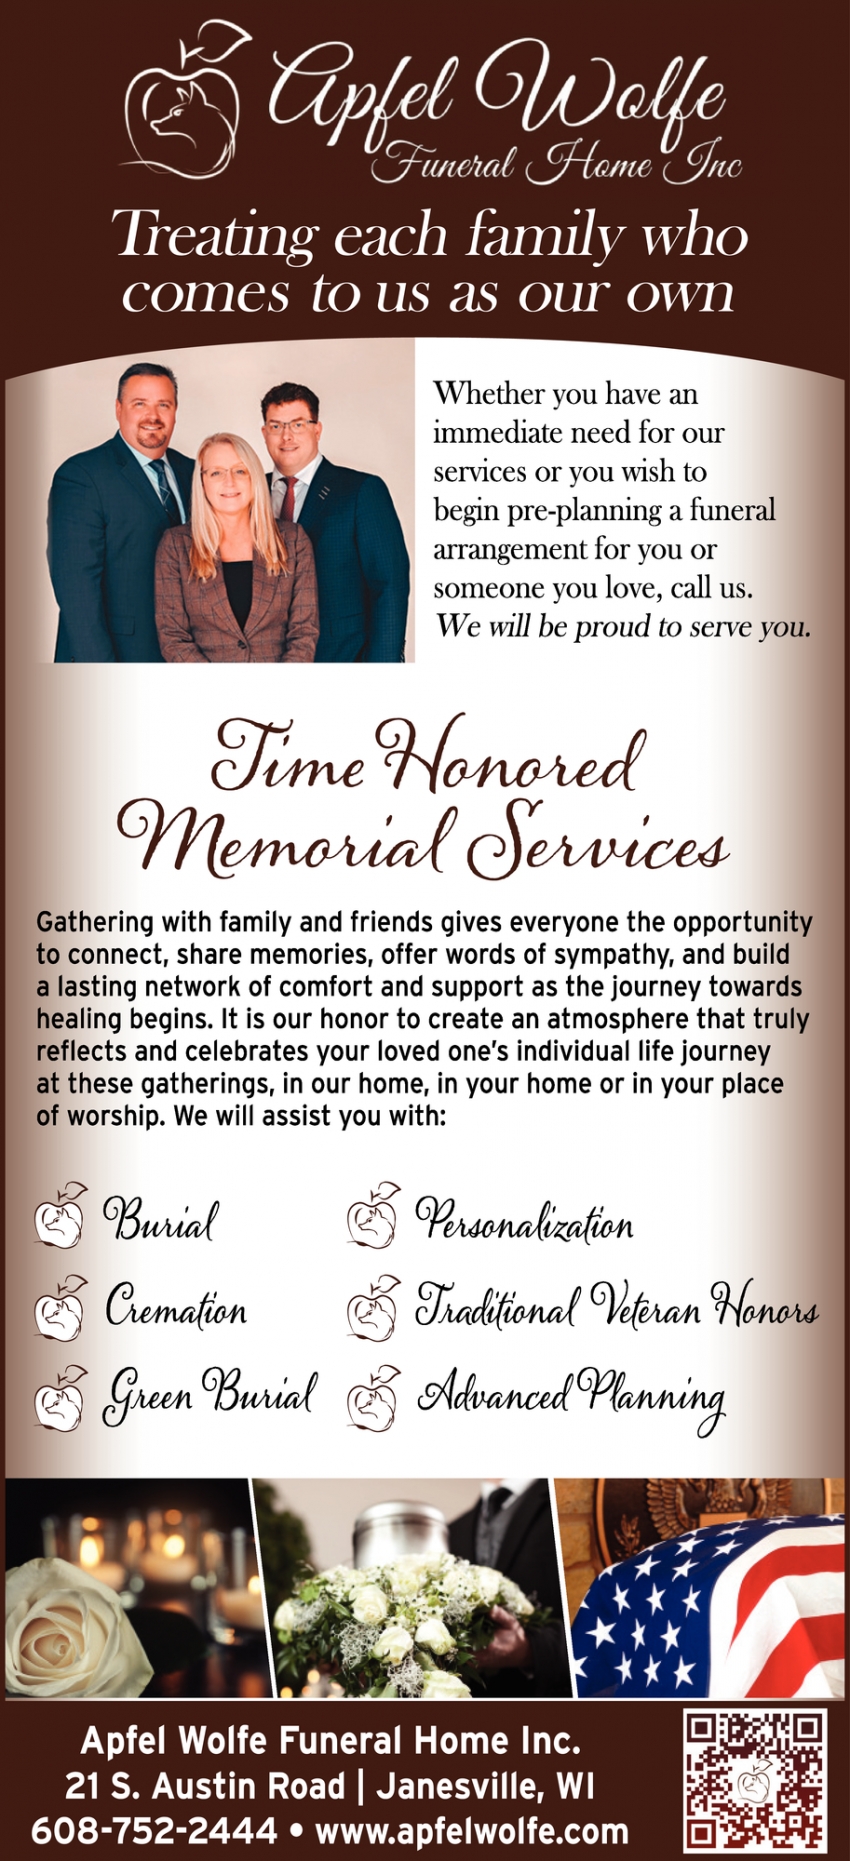 Time Honored Memorial Services